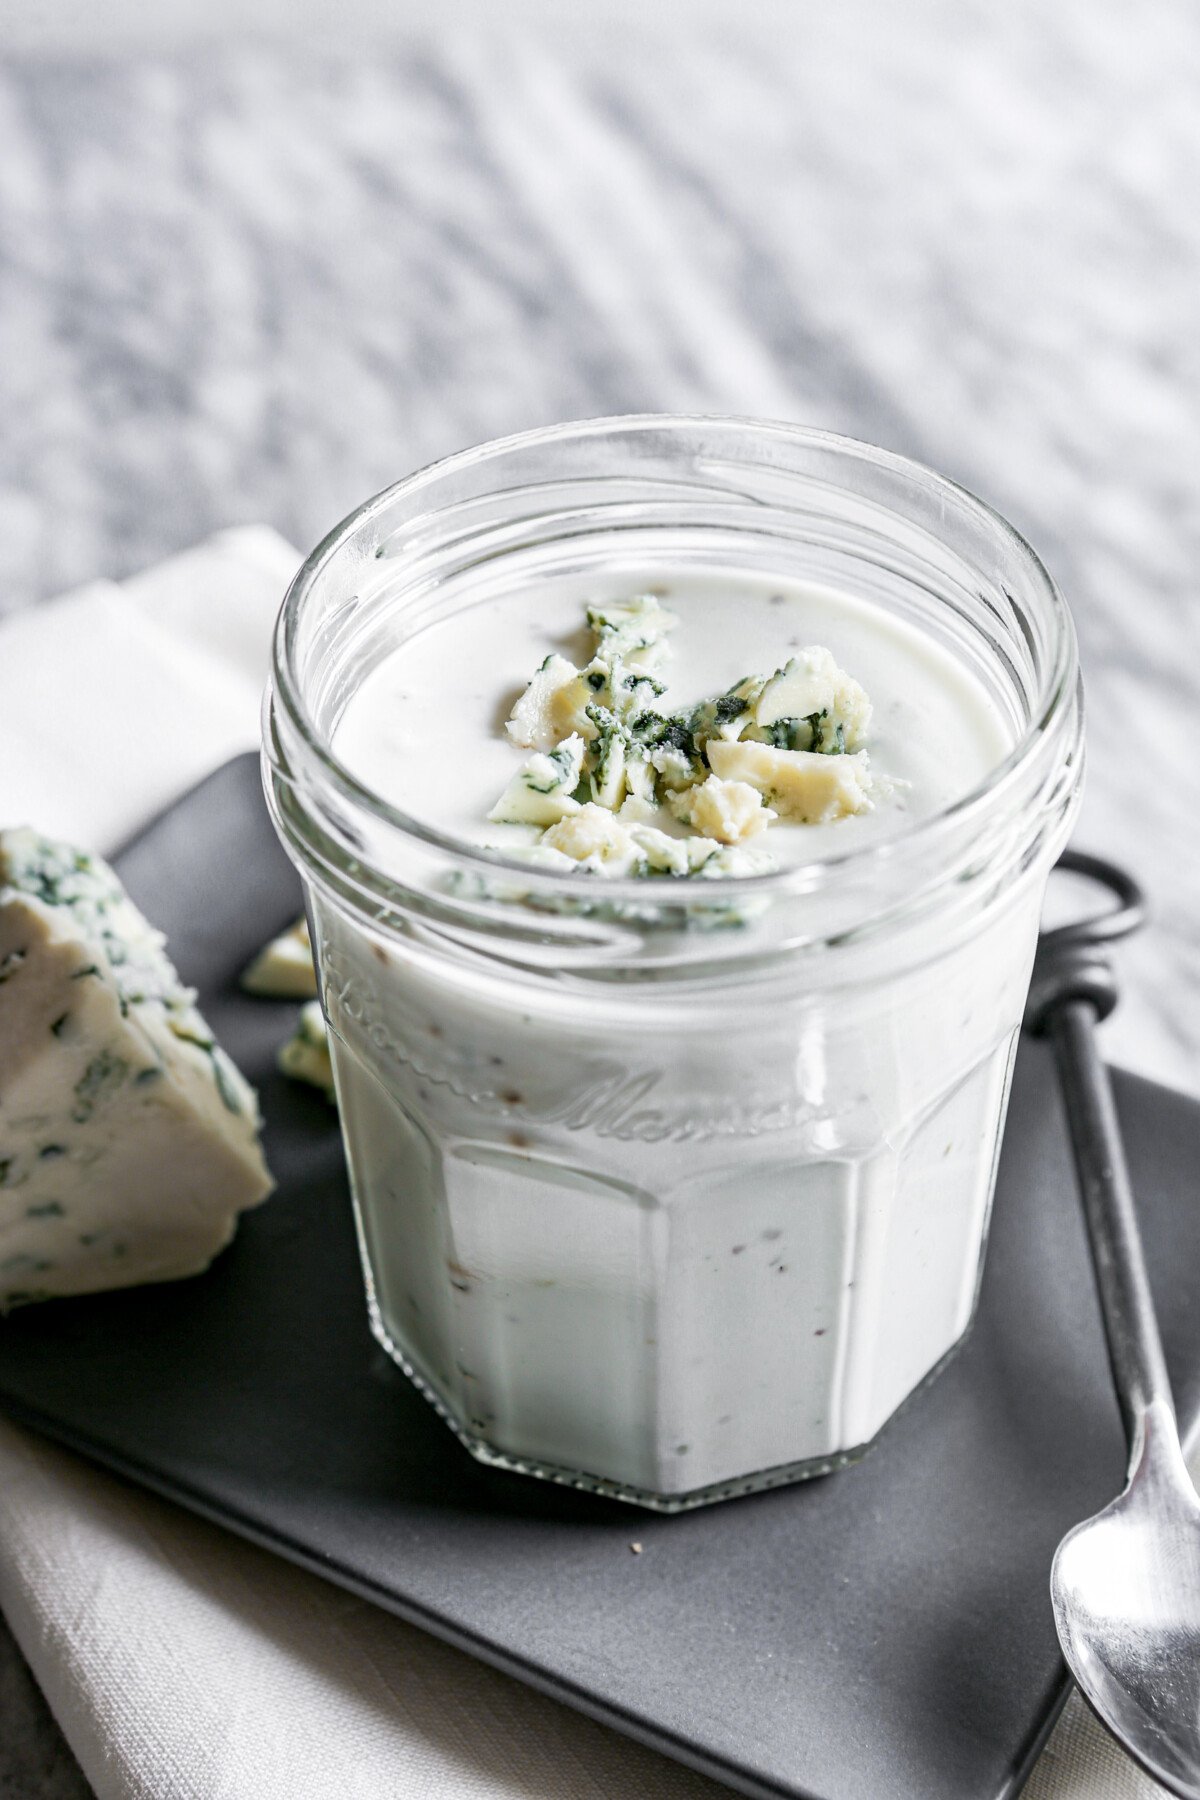 Photograph of blue cheese salad dressing in a glass jar set on a gray plate on a marble table.